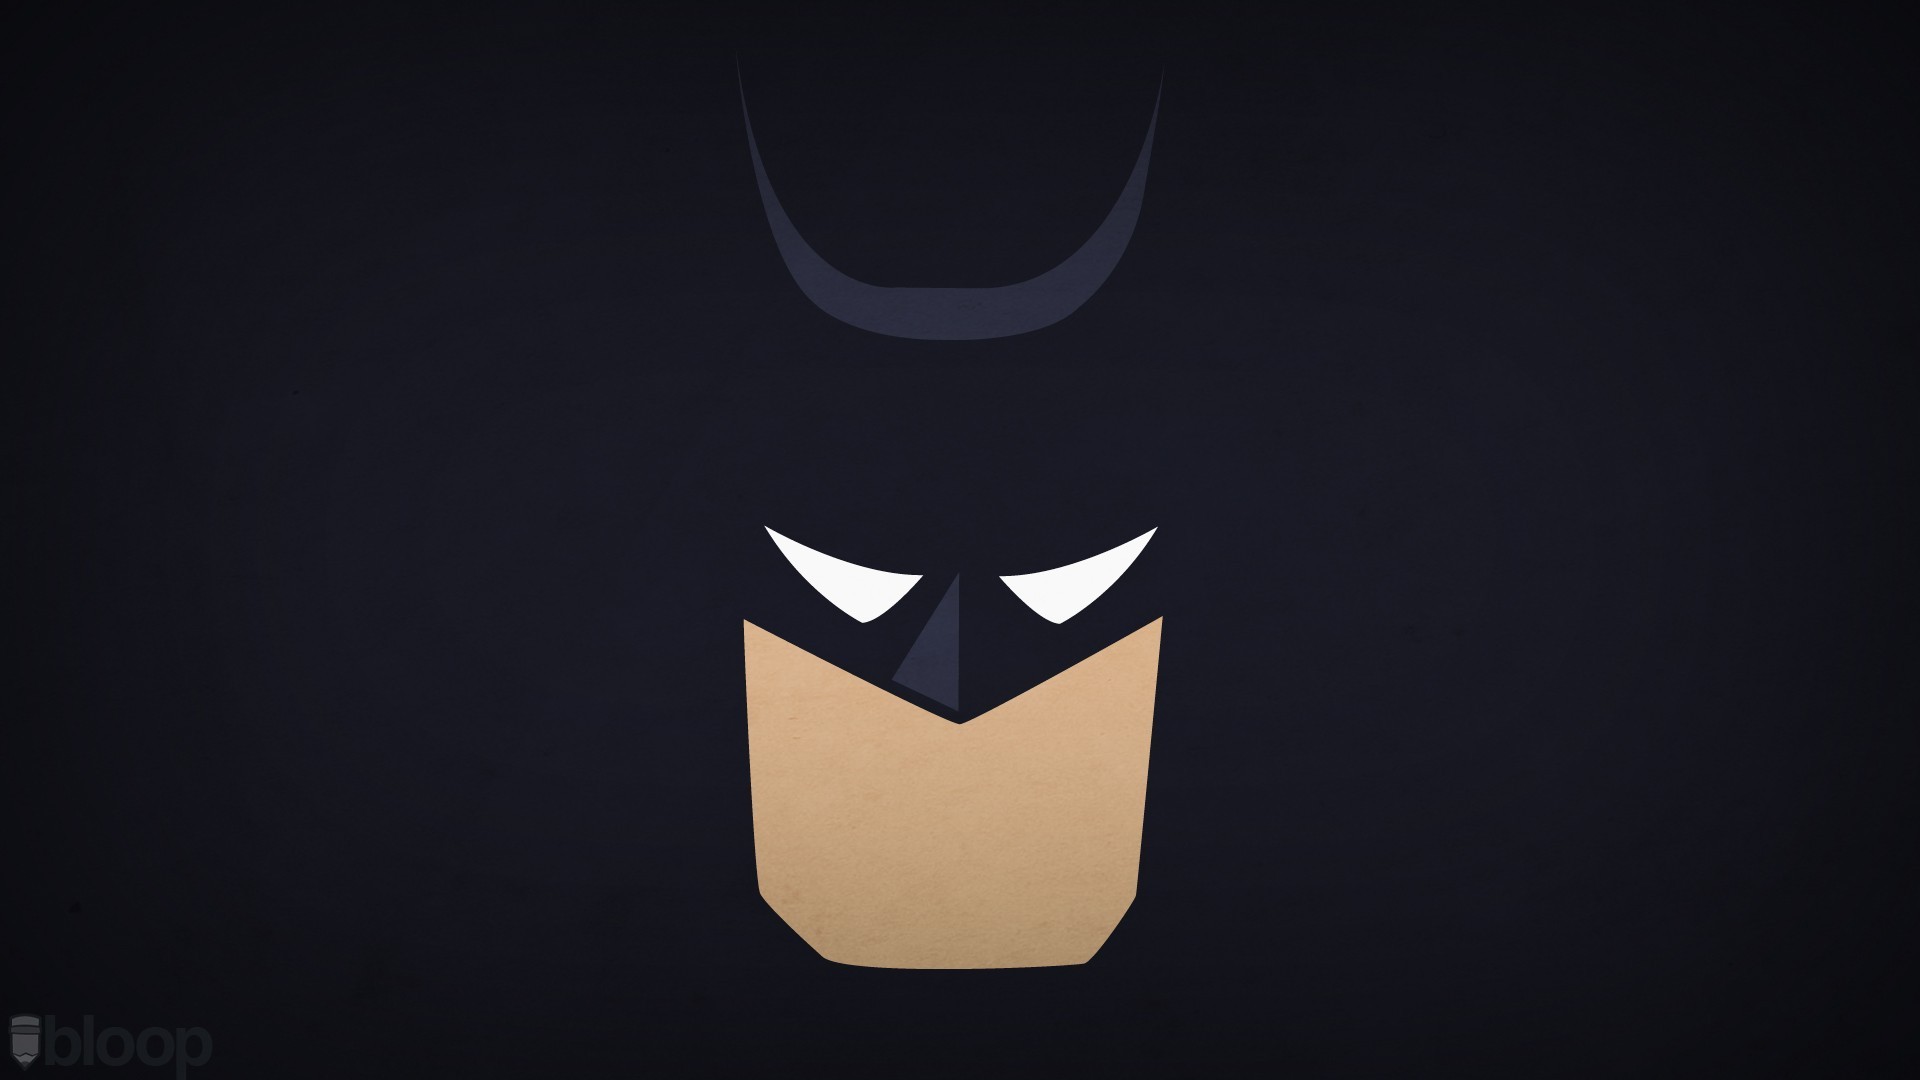 Minimalist Superhero Wallpapers (more inside) (xpost from r/wallpapers .